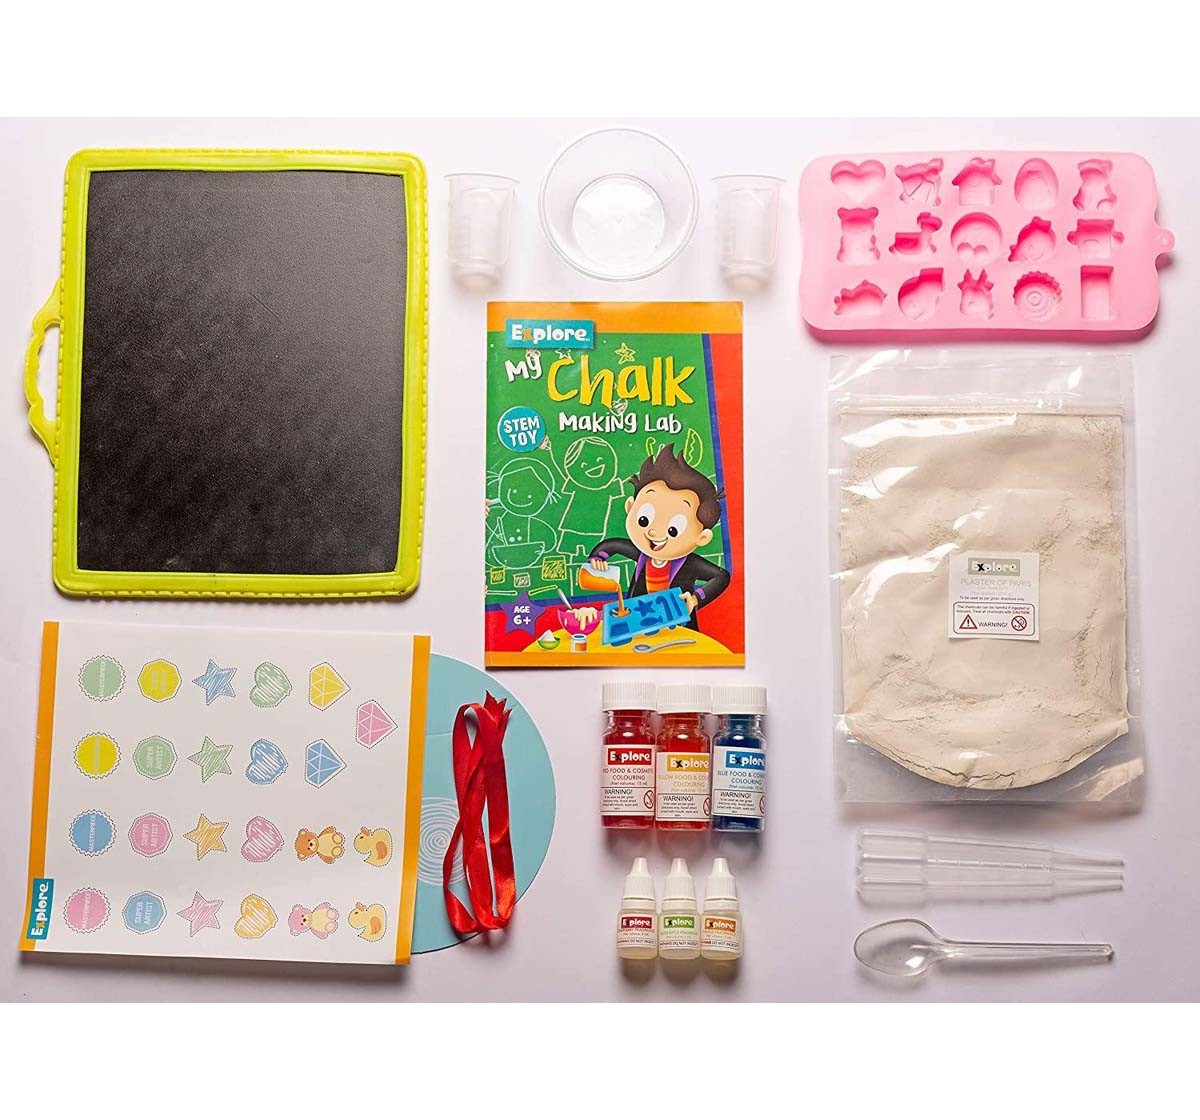 Explore - My Chalk Making Lab Science Kits for Kids Age 6Y+